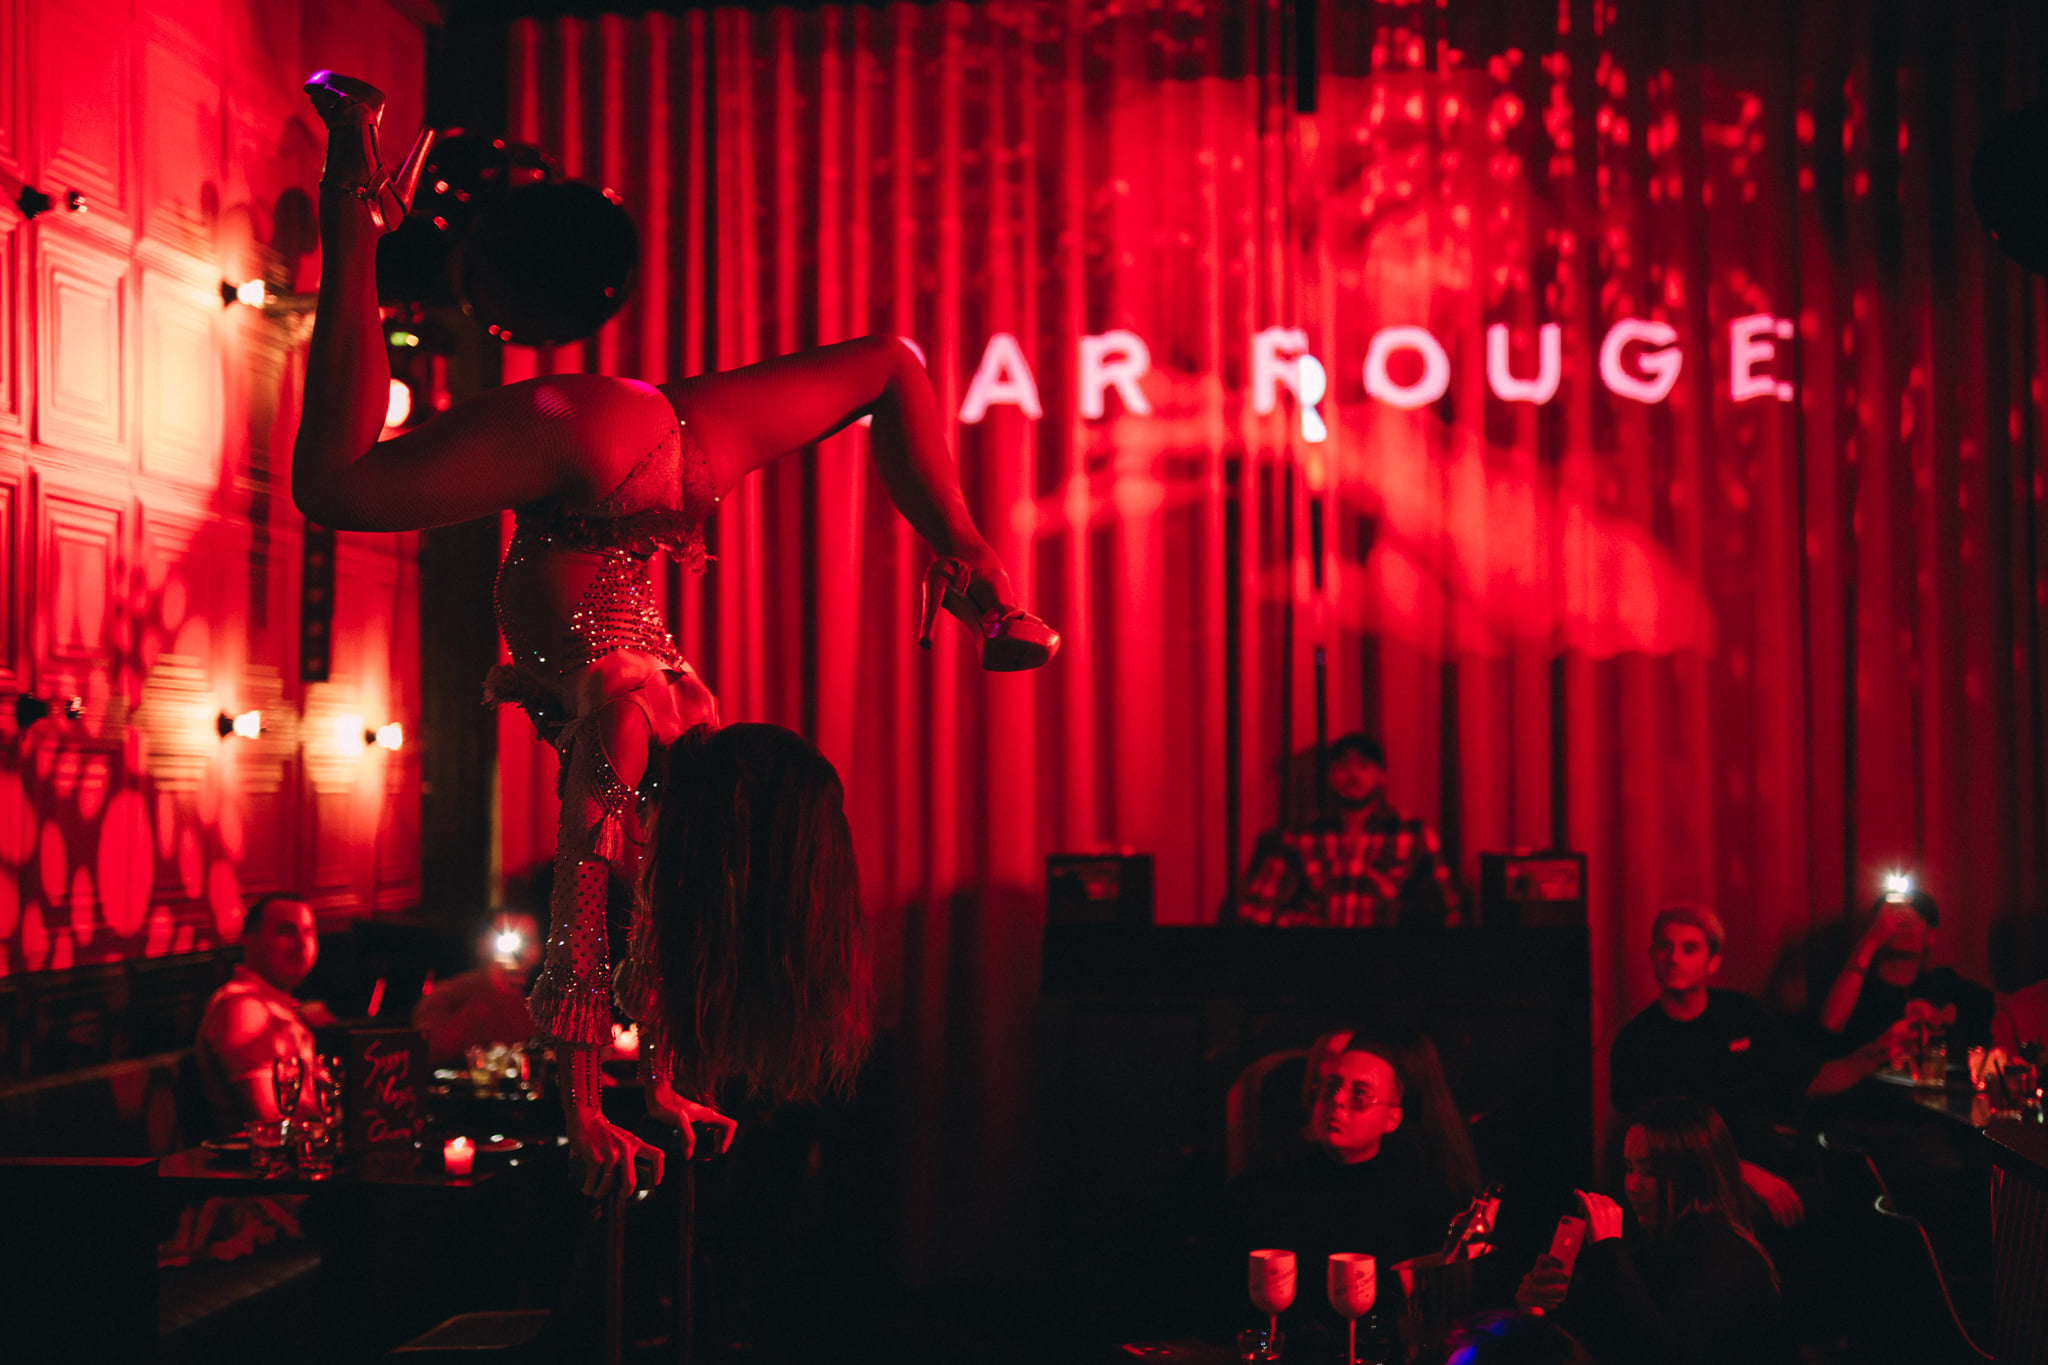 Bar Rouge act